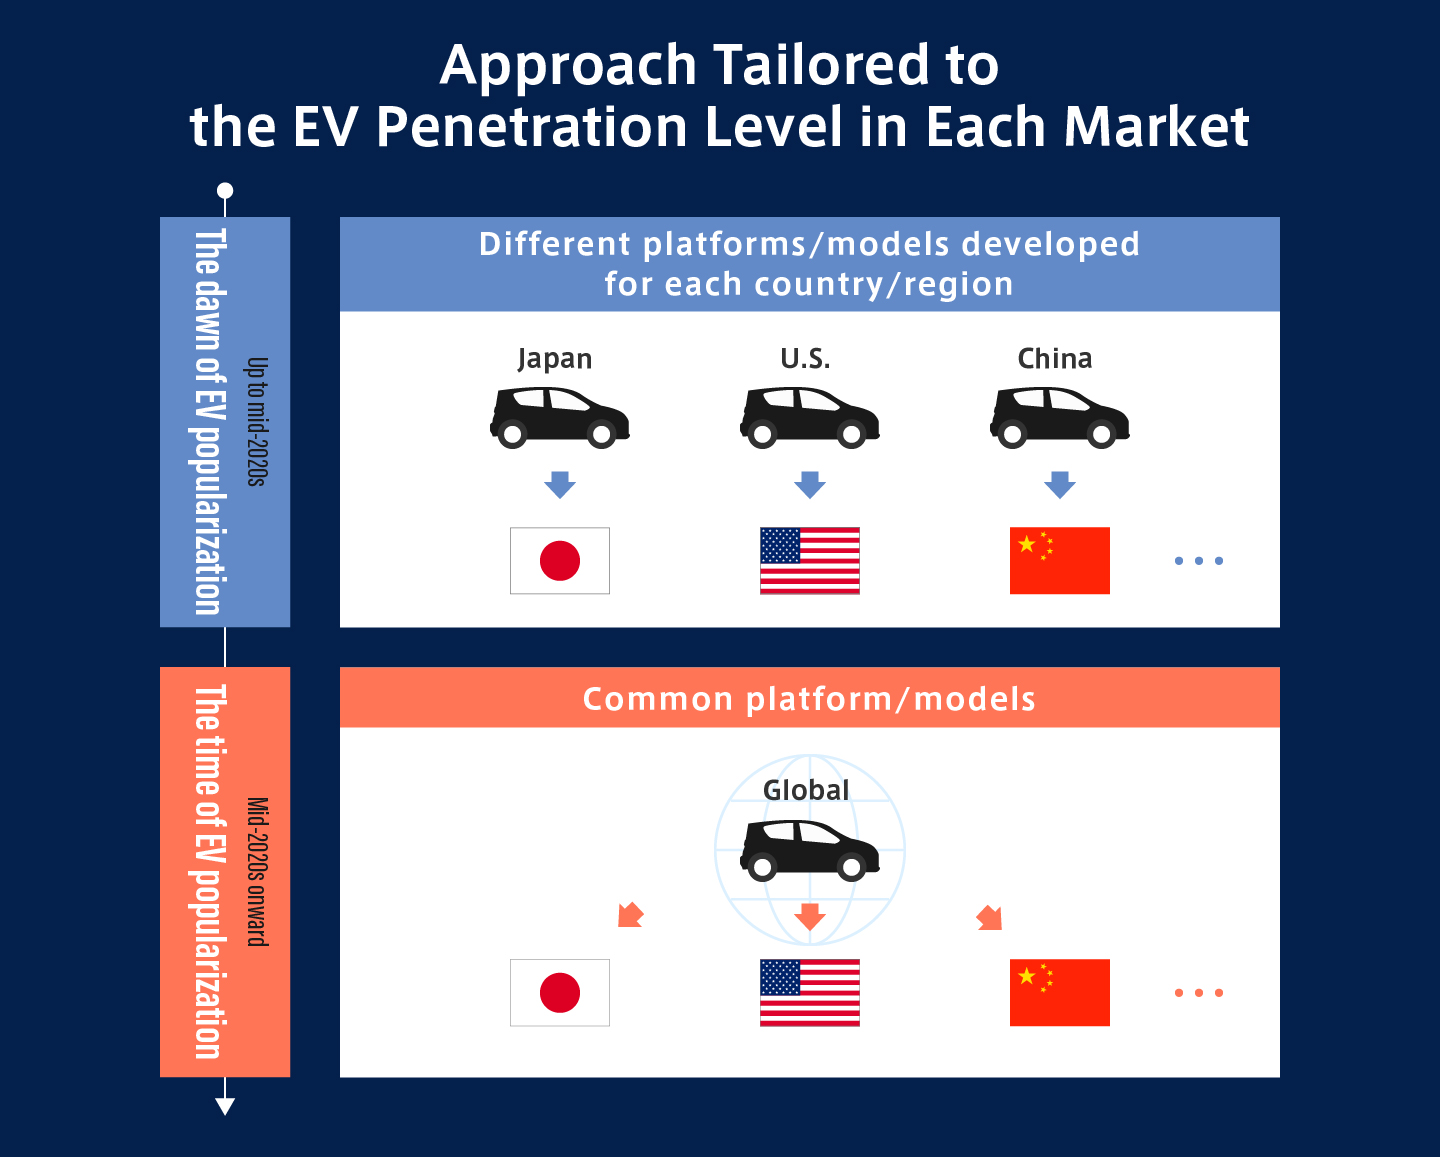 Approach Tailored to the EV Penetration Level in Each Market